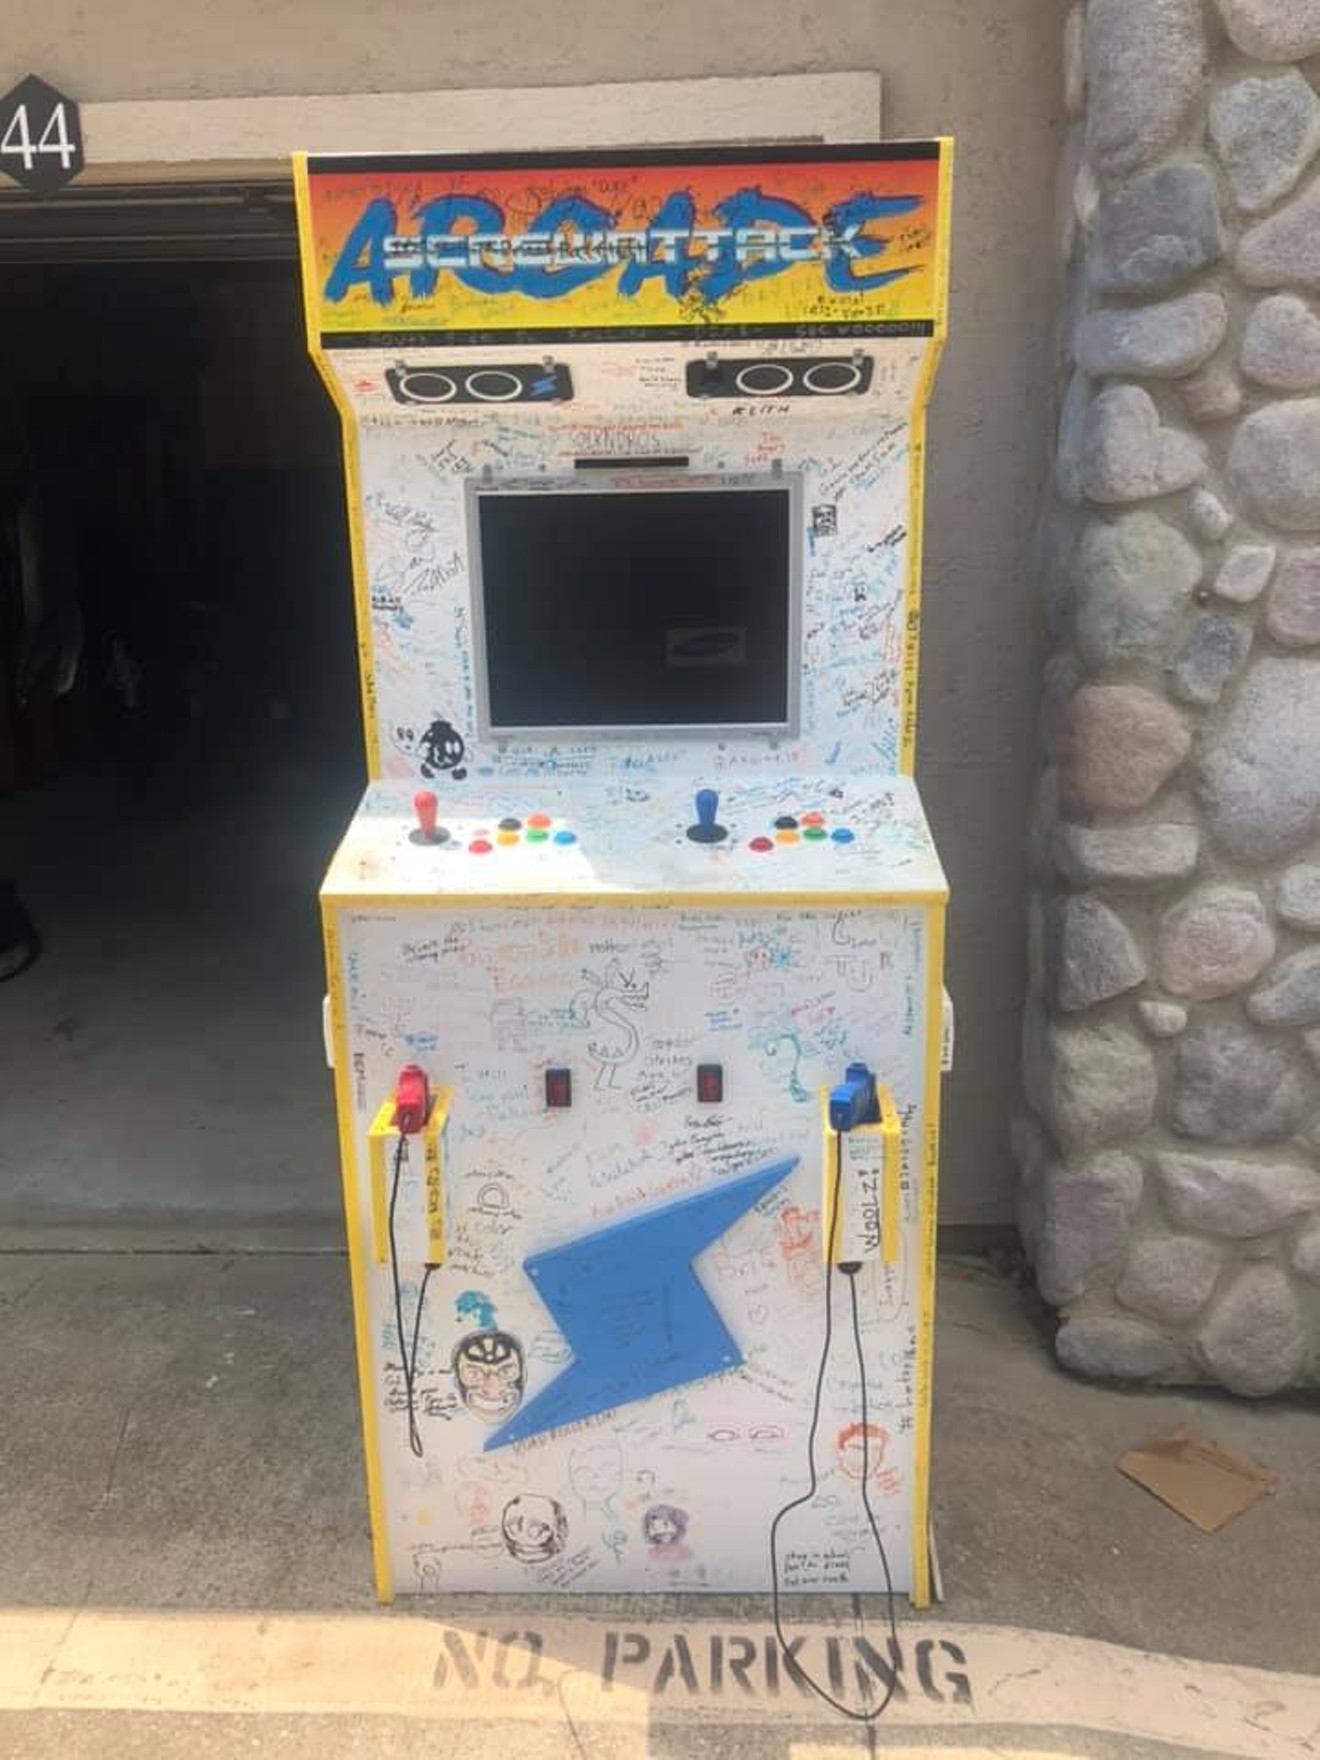 This custom arcade cabinet was a gift given at one of the many ScrewAttack Gaming conventions held in Dallas for the gaming media giant.